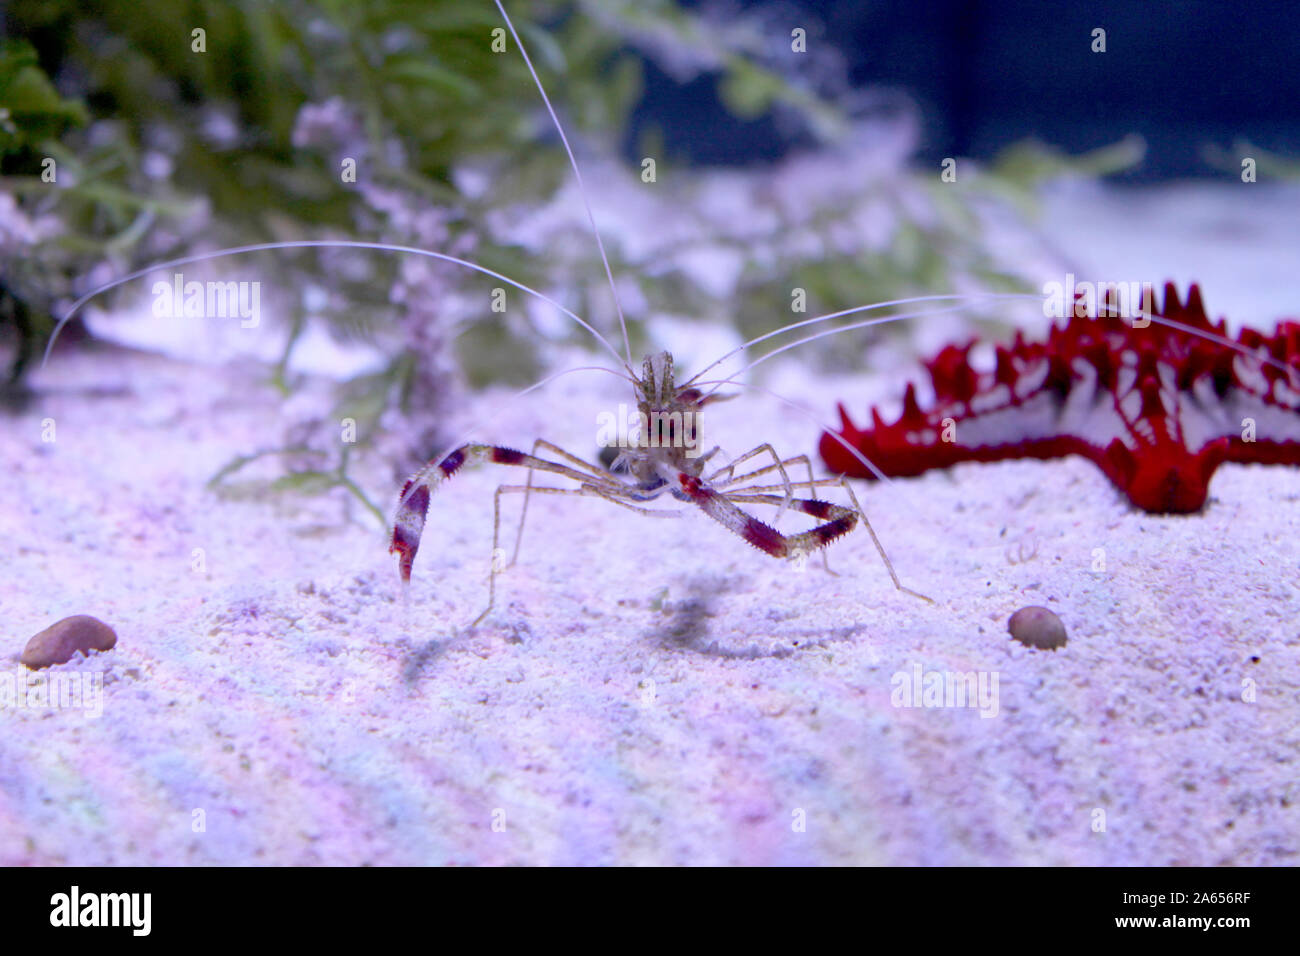 Banded coral or cleaner shrimp on the sea bottom. Front view. Red and white striped underwater inhabitant. Sea and ocean life. Diving, oceanarium or a Stock Photo